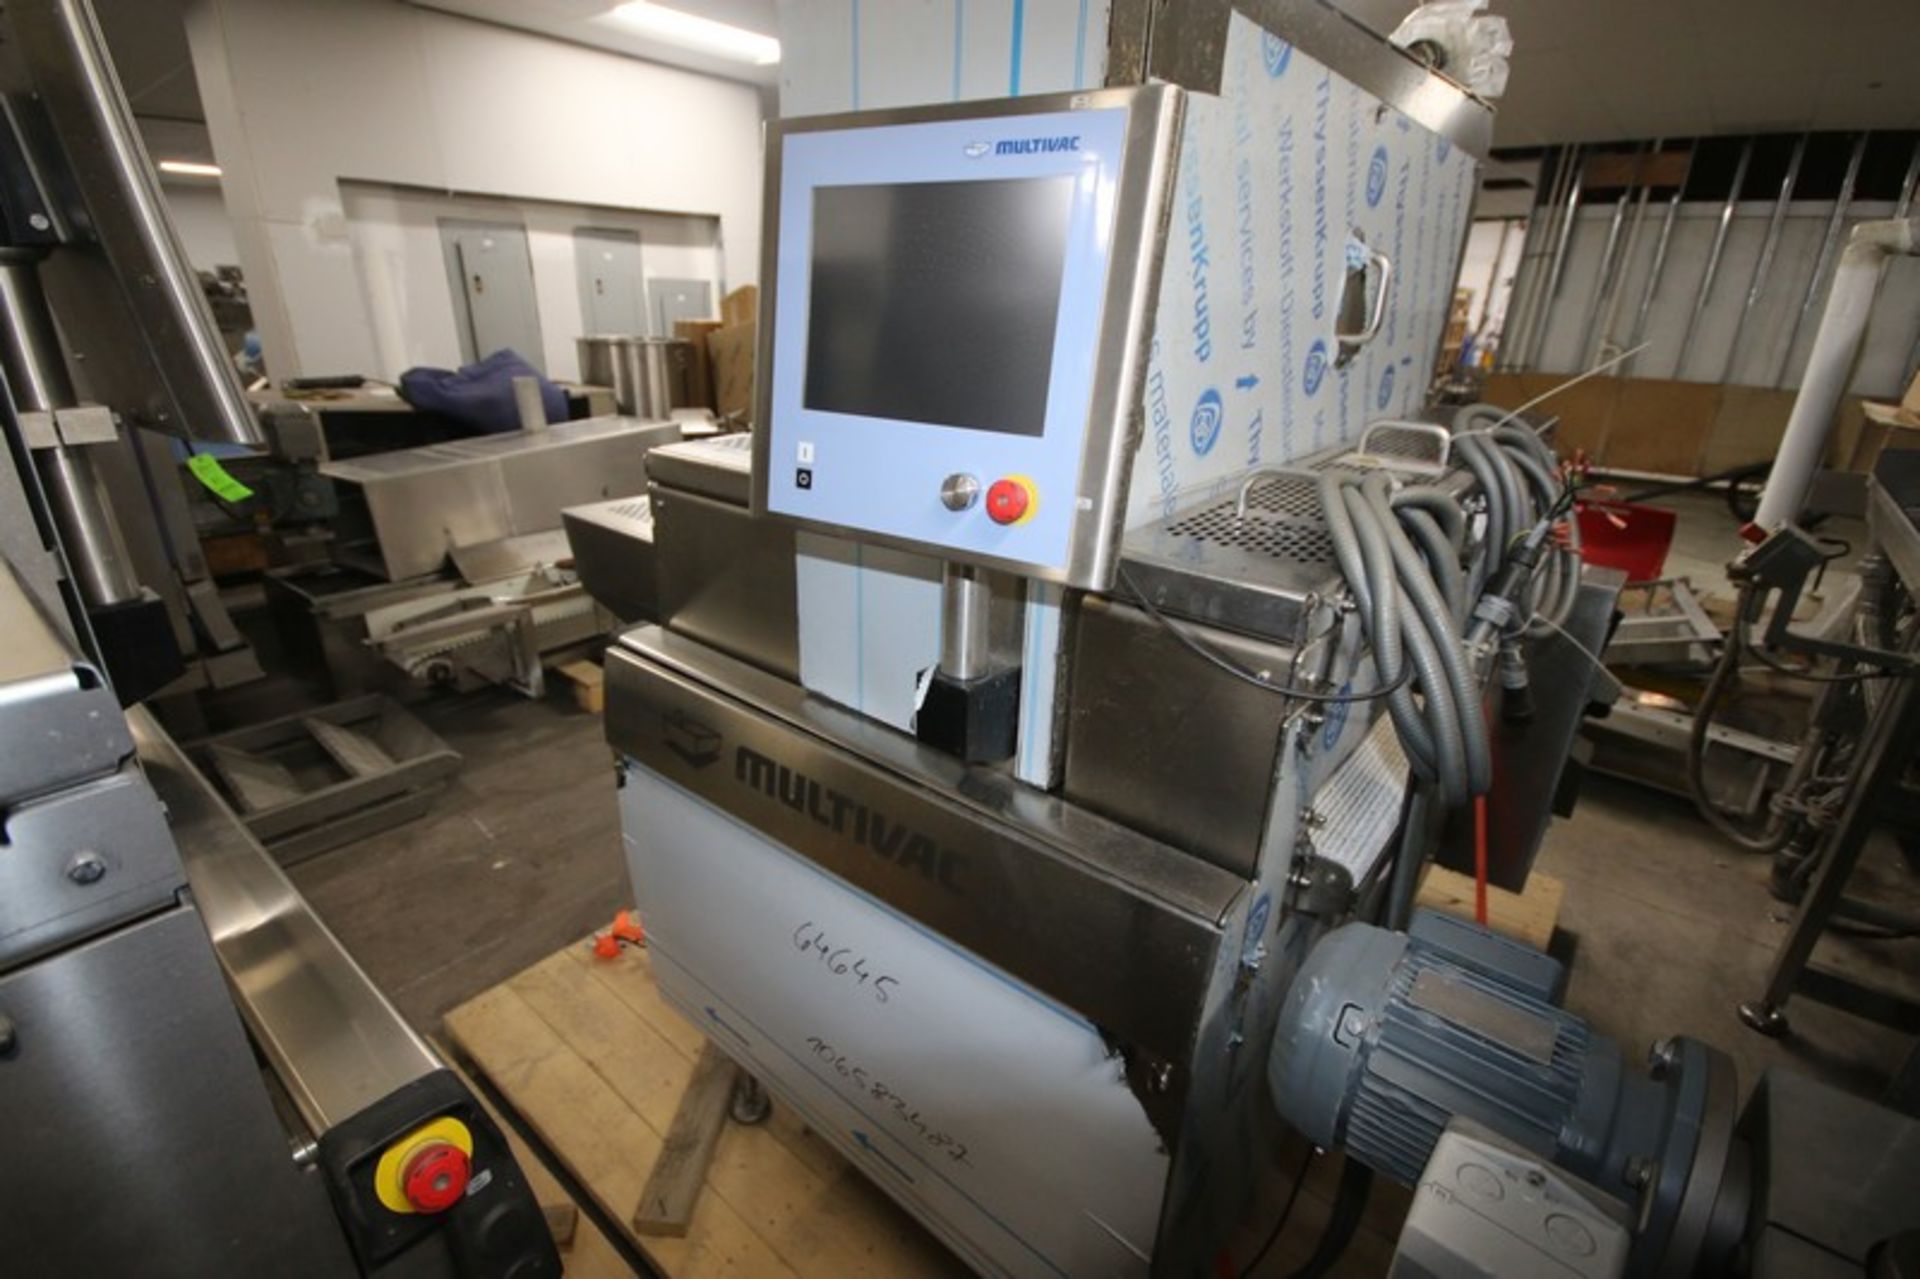 NEW 2012 MultiVac Vacuum Packager, Type: H050, S/N 158612, 208/120 Volts (LOCATED IN BELTSVILLE, MD) - Image 8 of 14